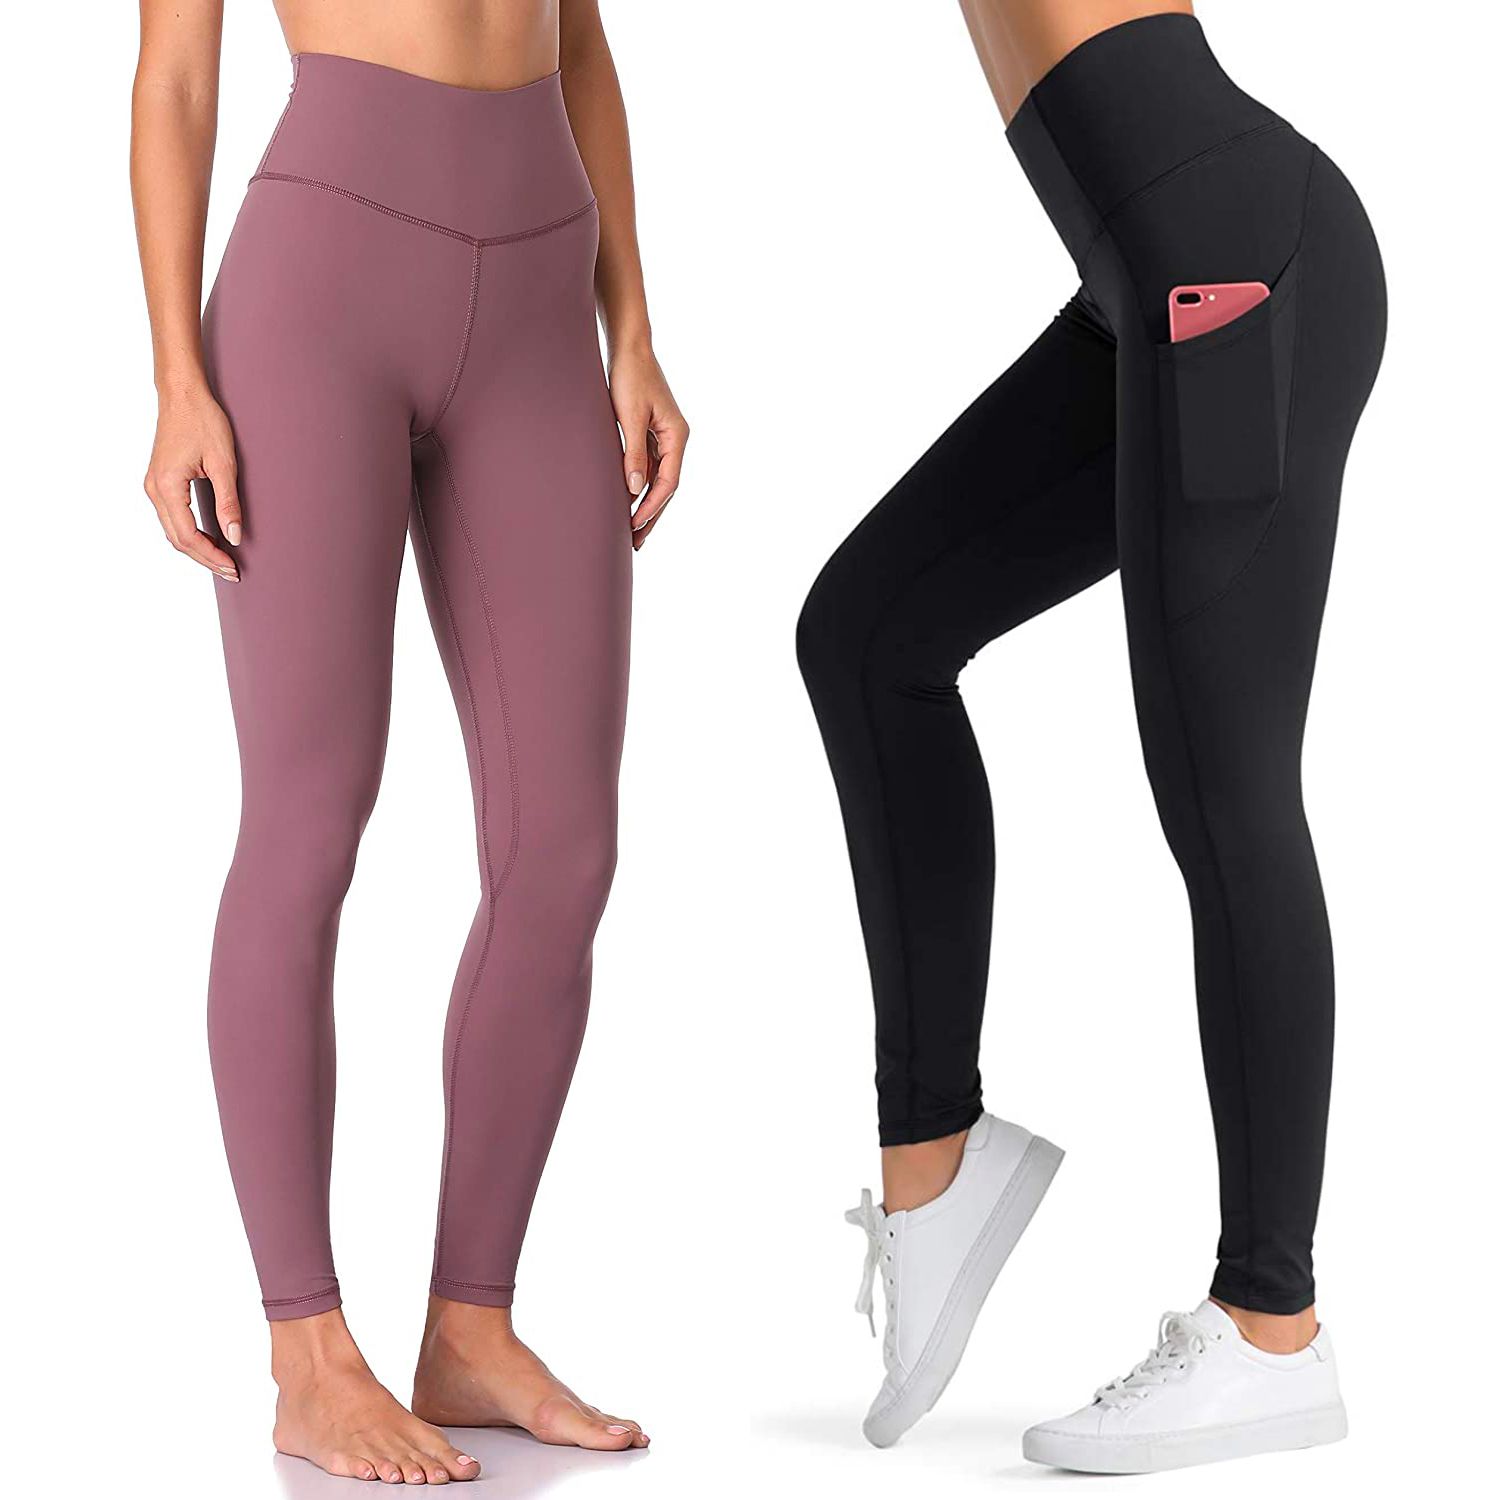 The Best Activewear on Amazon, According to Customer Review | PEOPLE.com